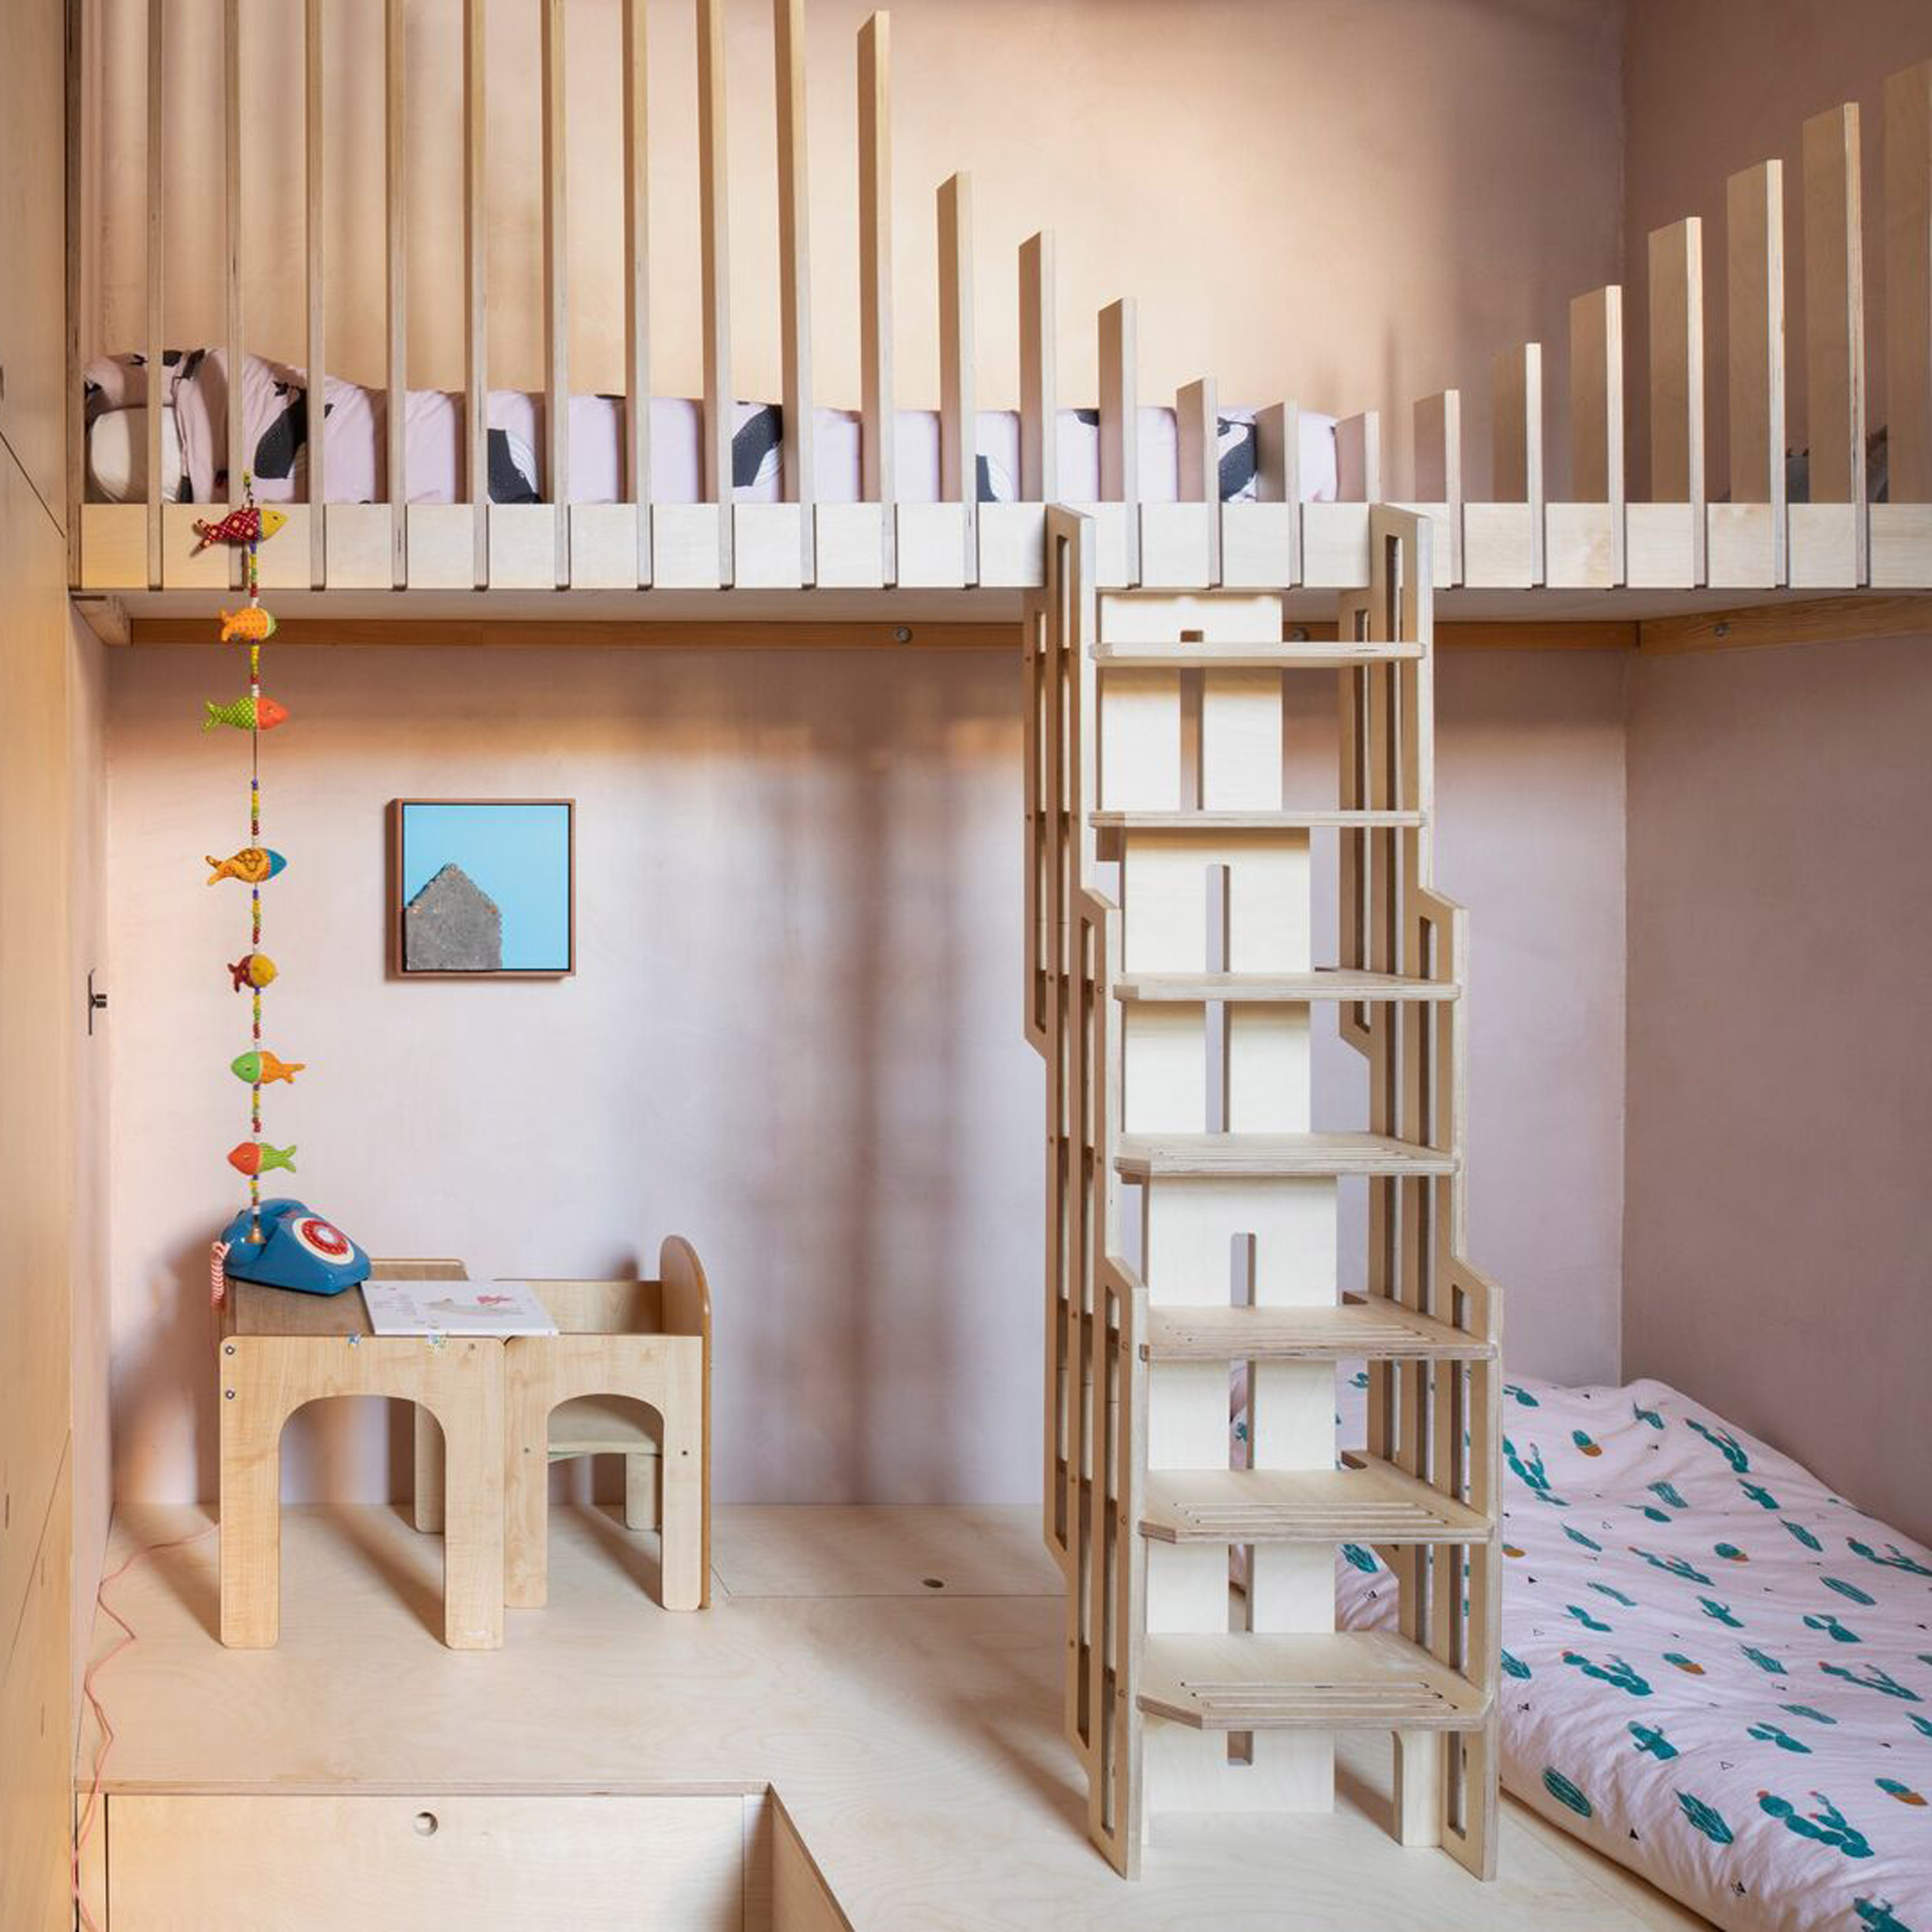 Ten Kids' Rooms With Space-Saving Loft Beds And Bunk Beds